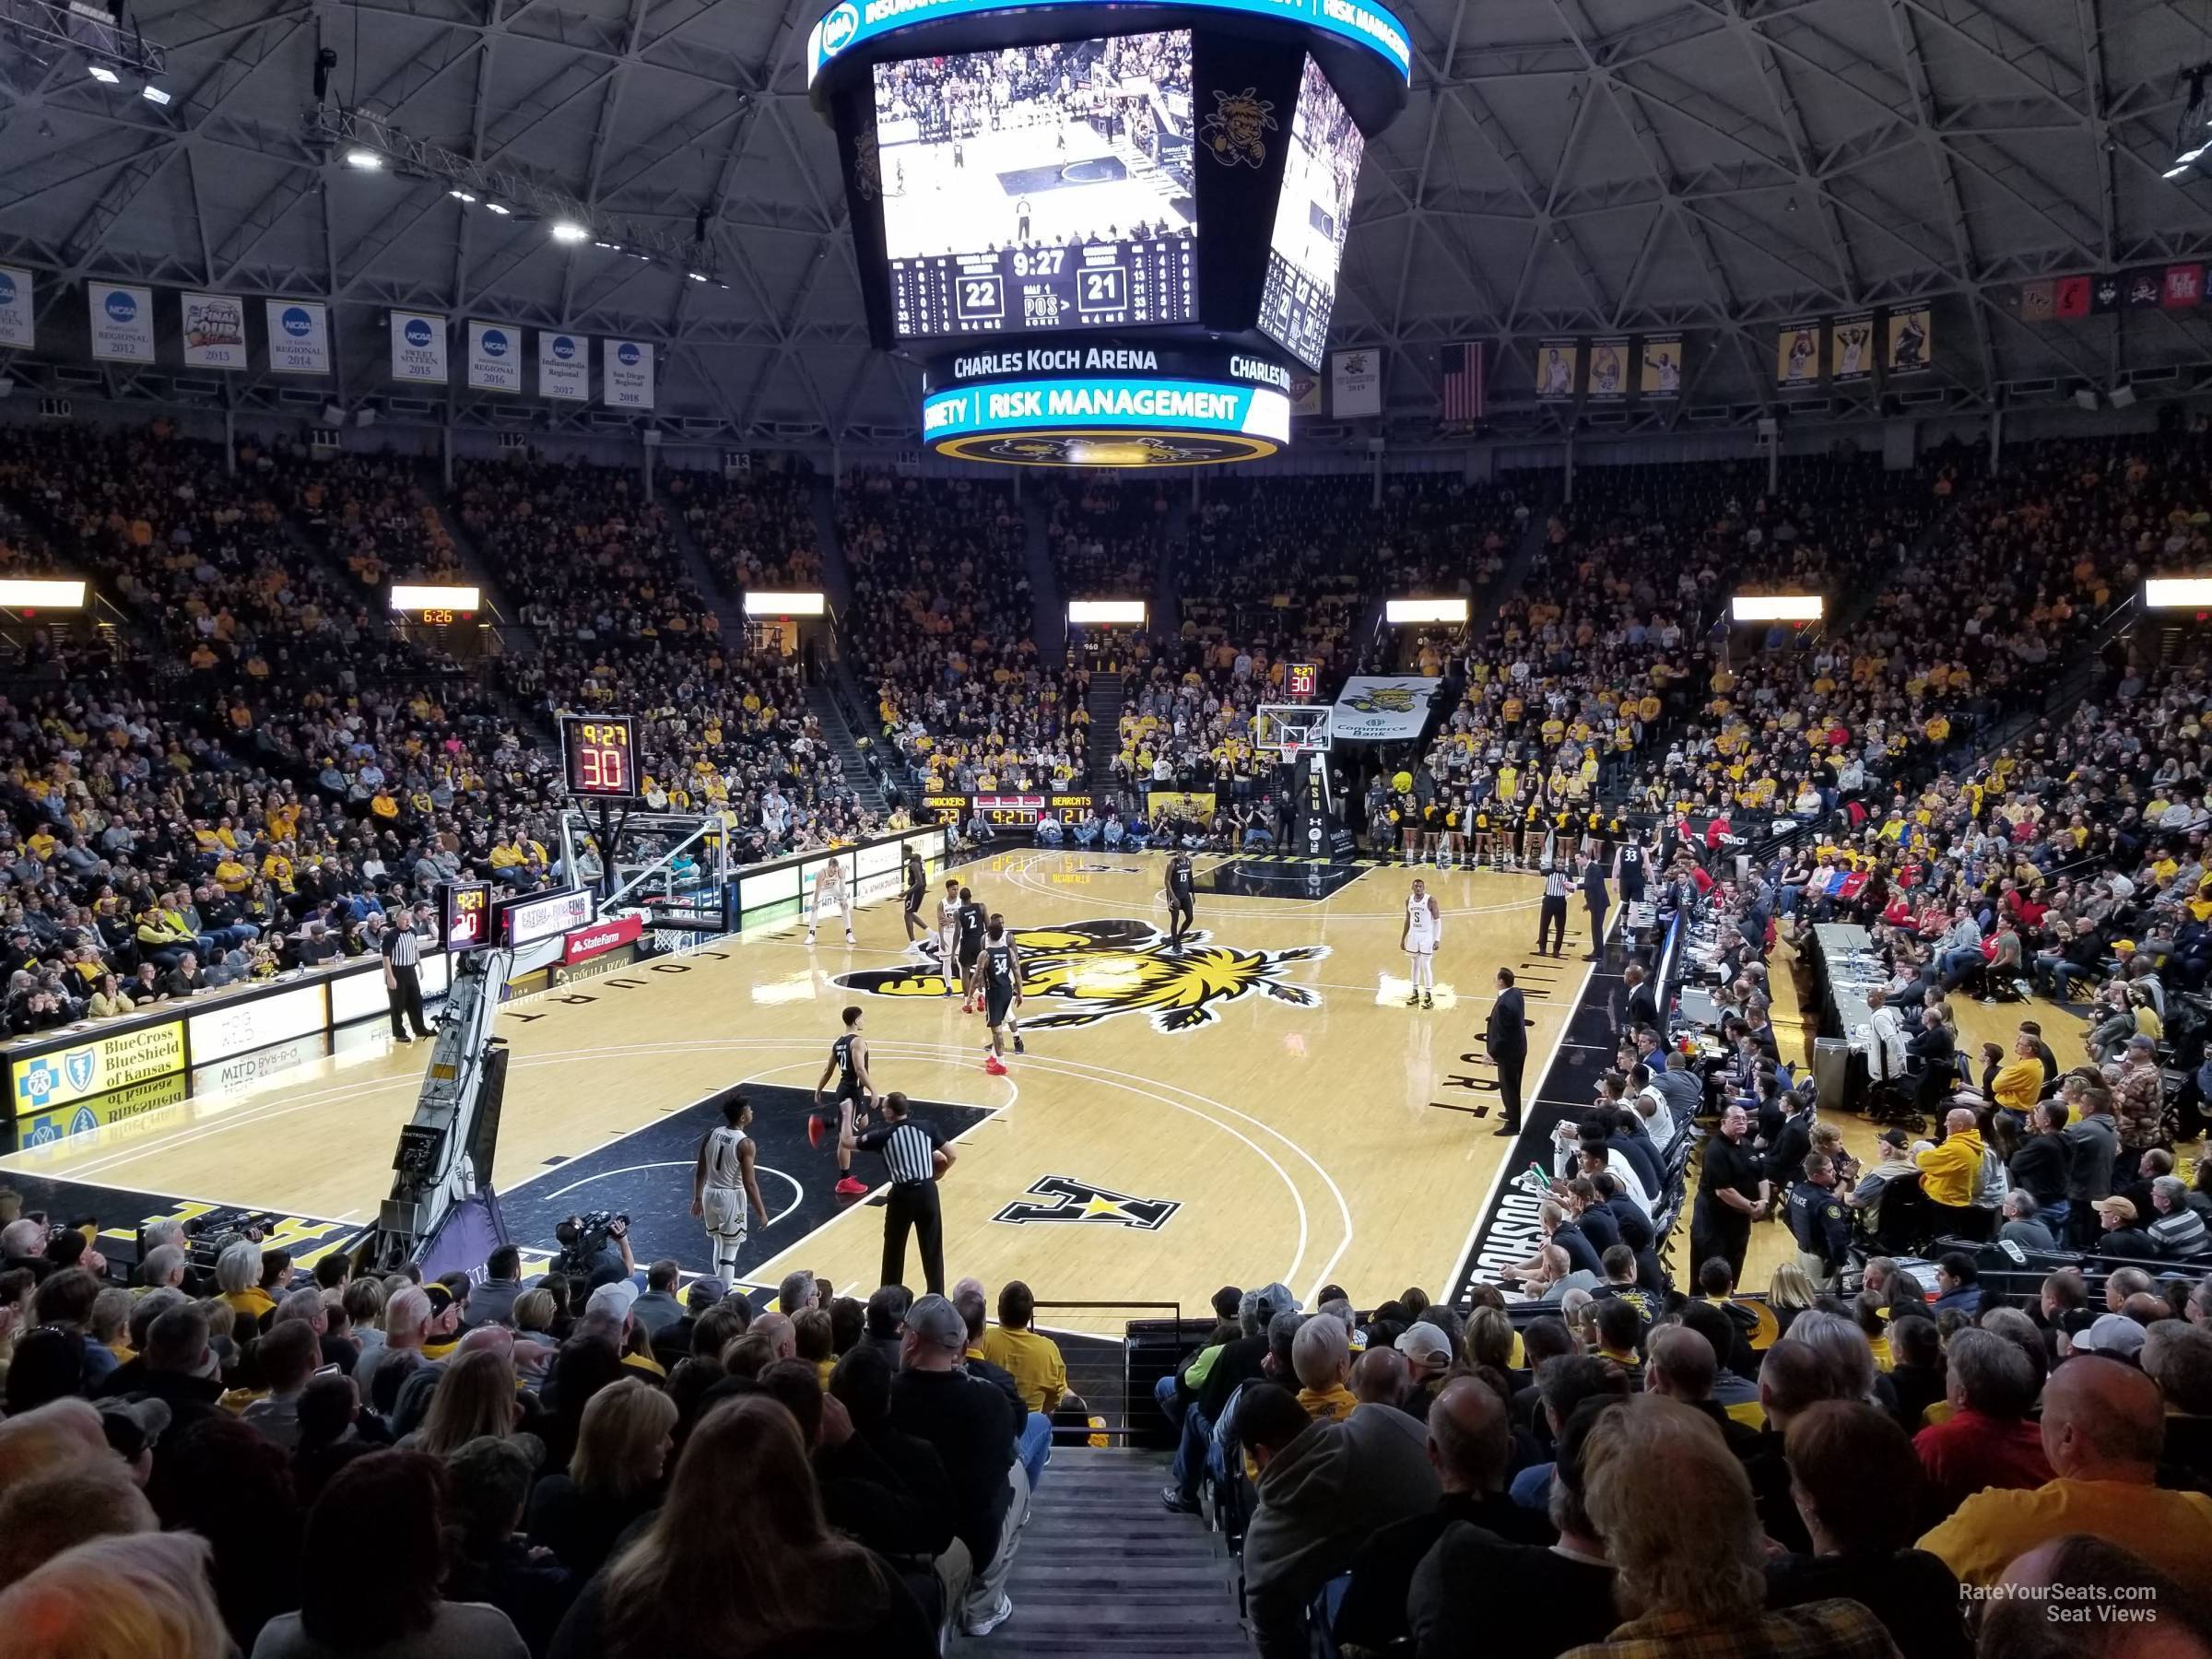 section 124, row 16 seat view  - charles koch arena